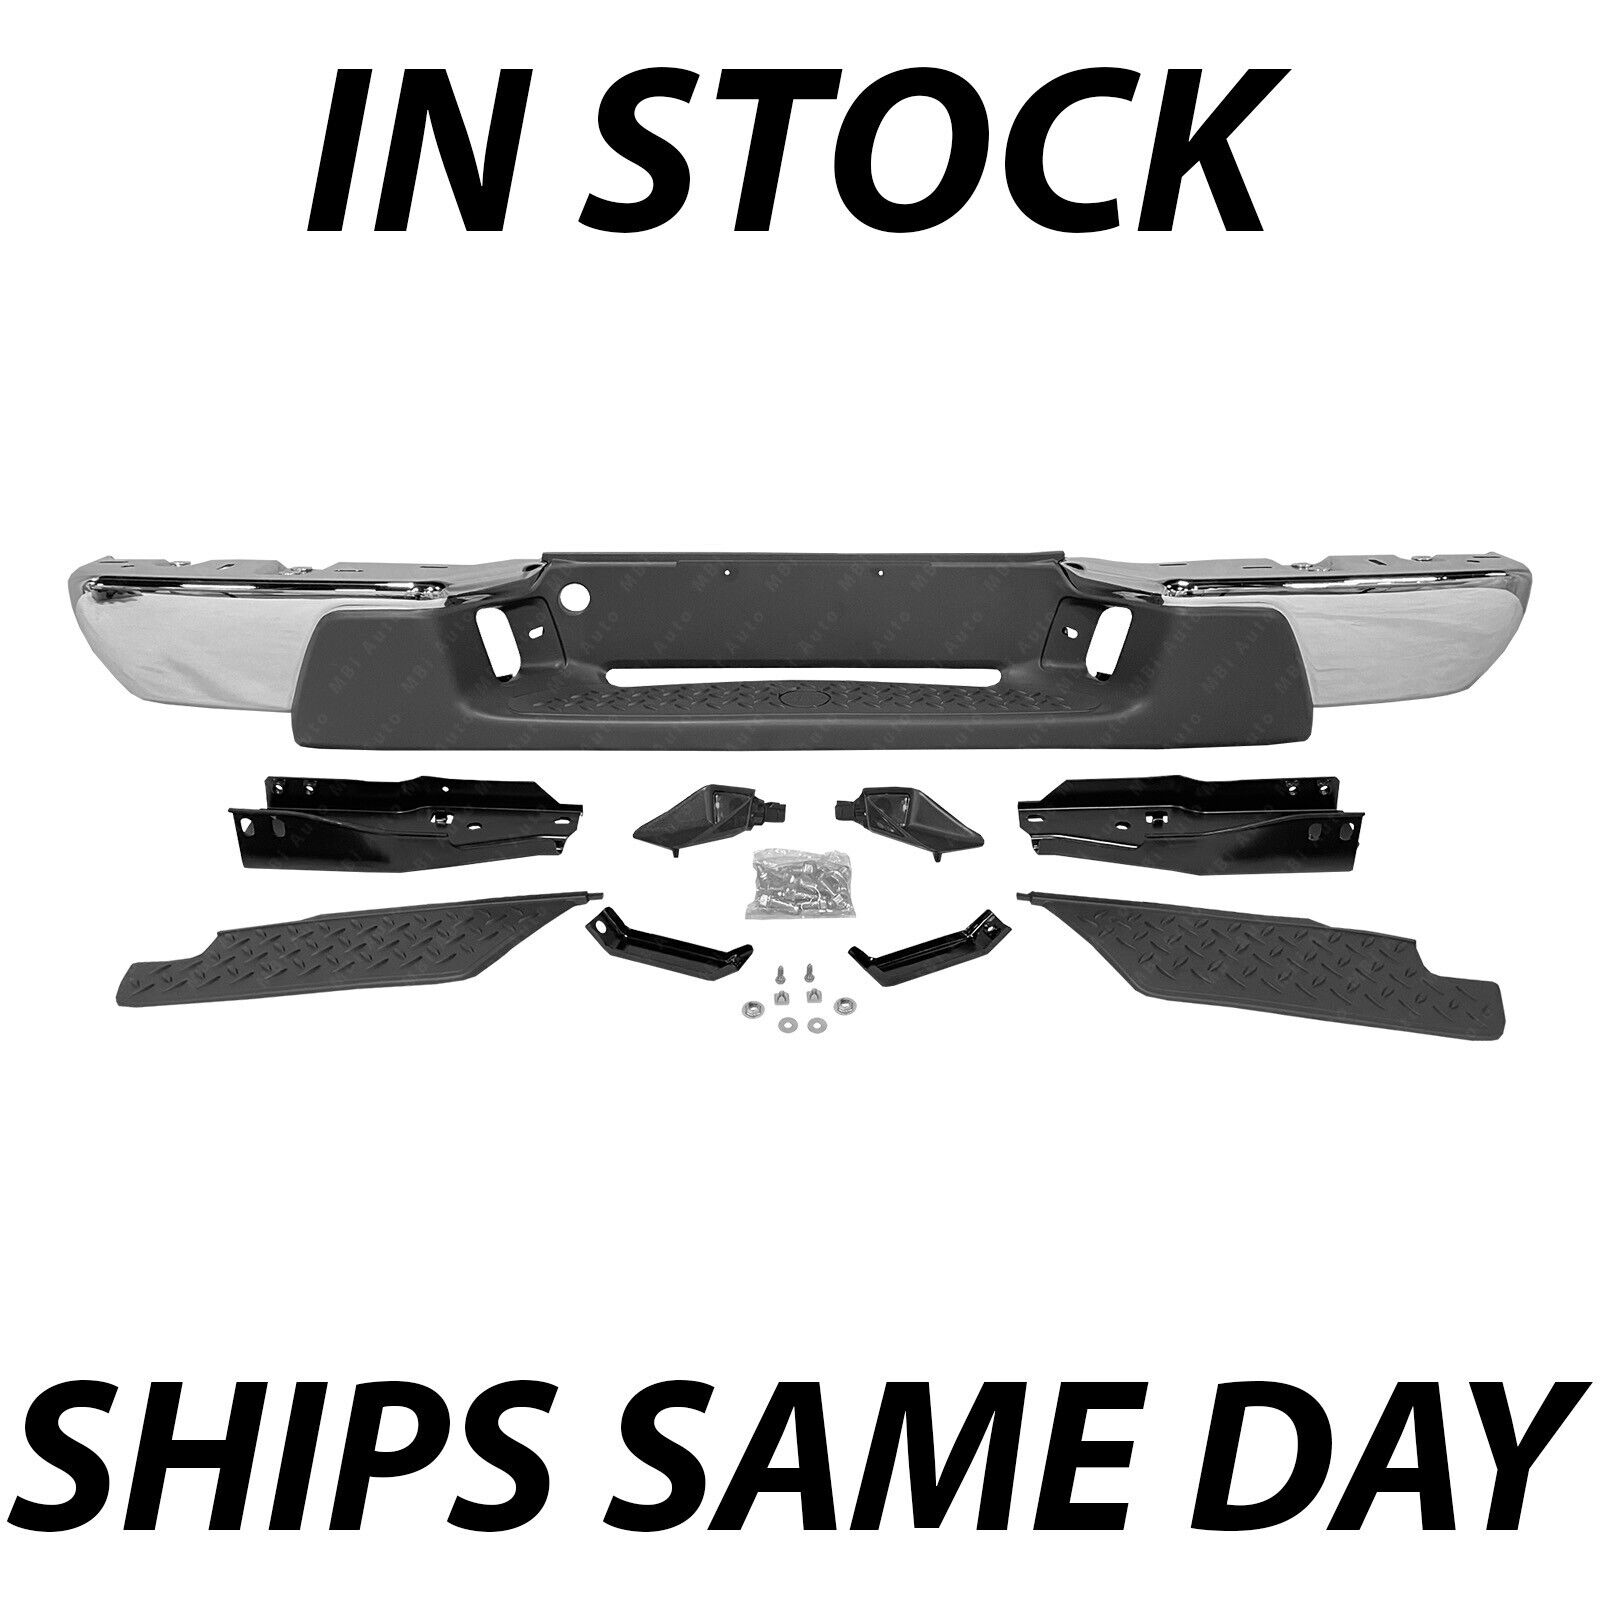 Complete Chrome Rear Steel Bumper For 2004-2007 Chevy Colorado GMC Canyon Pickup